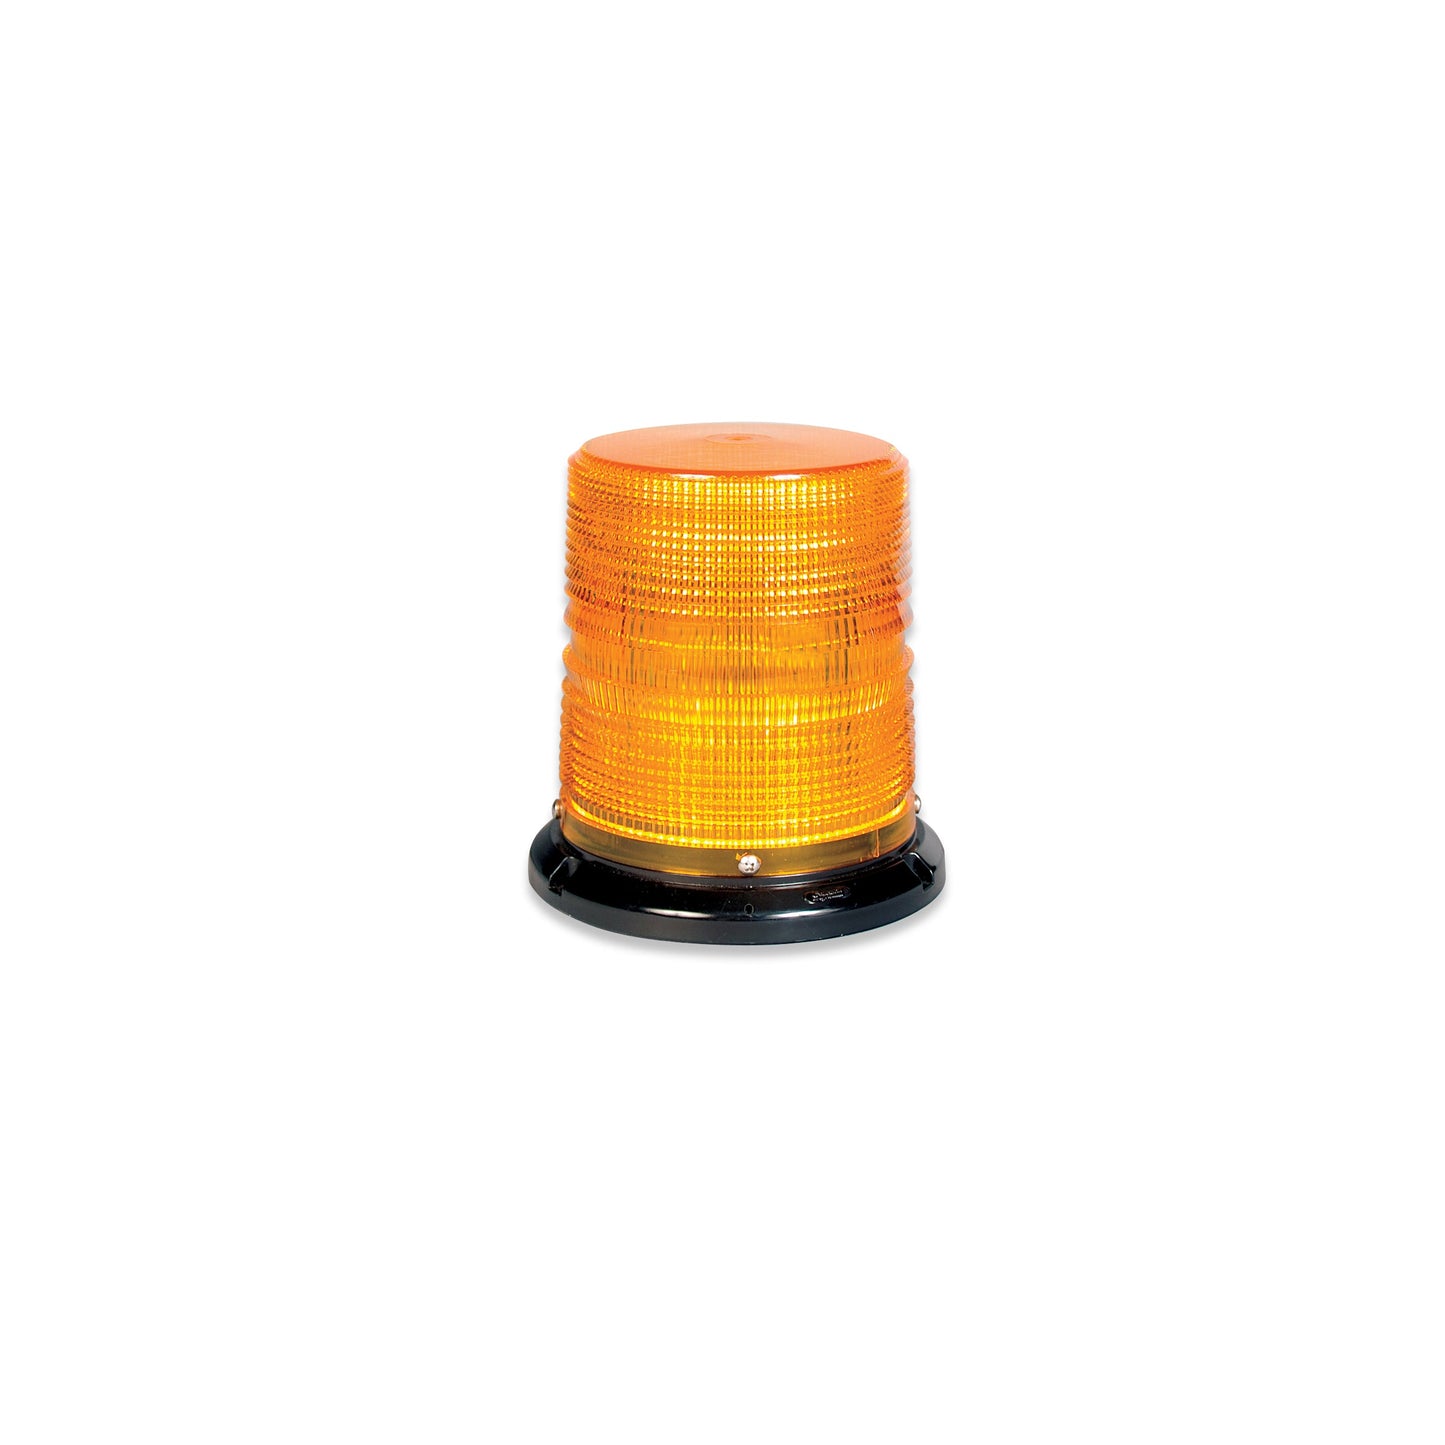 Soundoff Signal ELB45BML+AC 4500 Series Led Beacon, 10-30V, Sae J845 Class 1 - Magnetic Mount, 4" Clear Dome/ Amber Leds